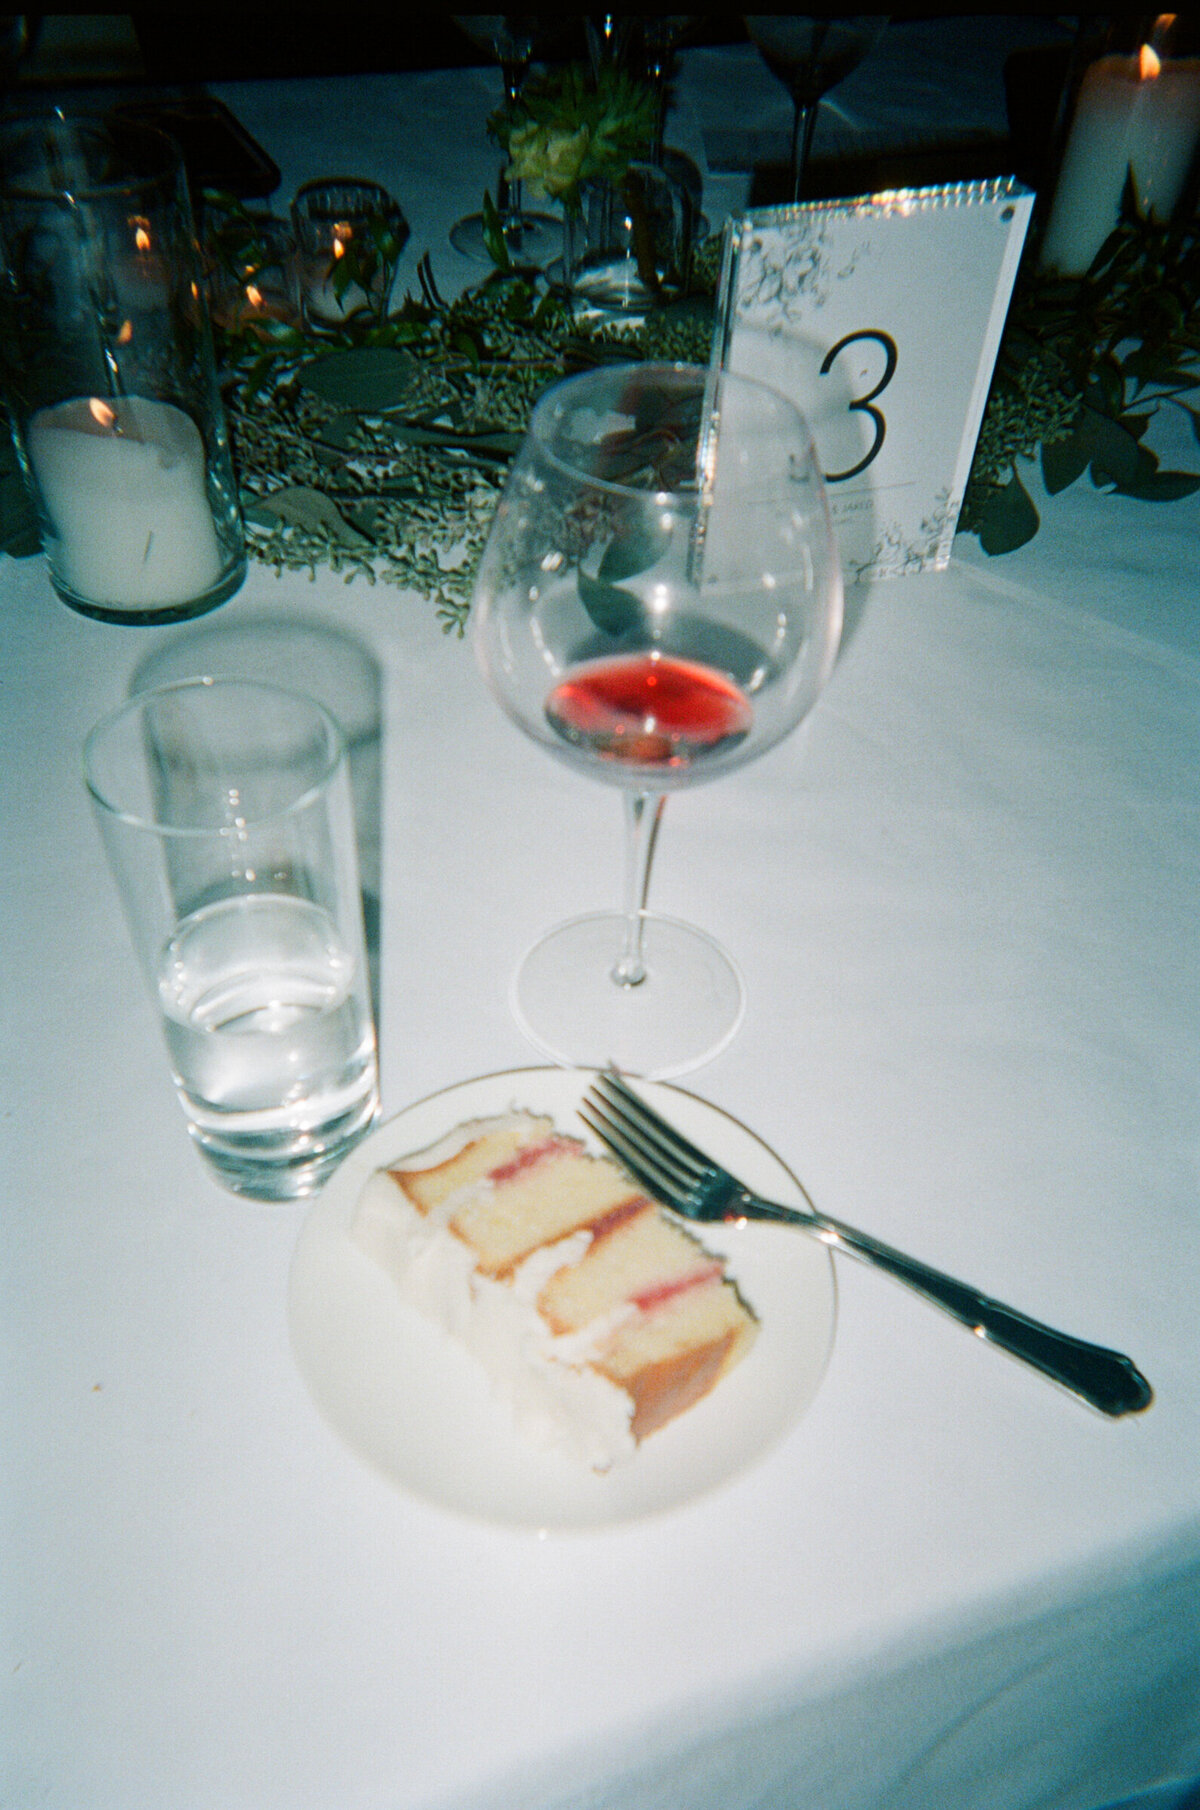 cake and wine abandoned at a reception table at a wedding